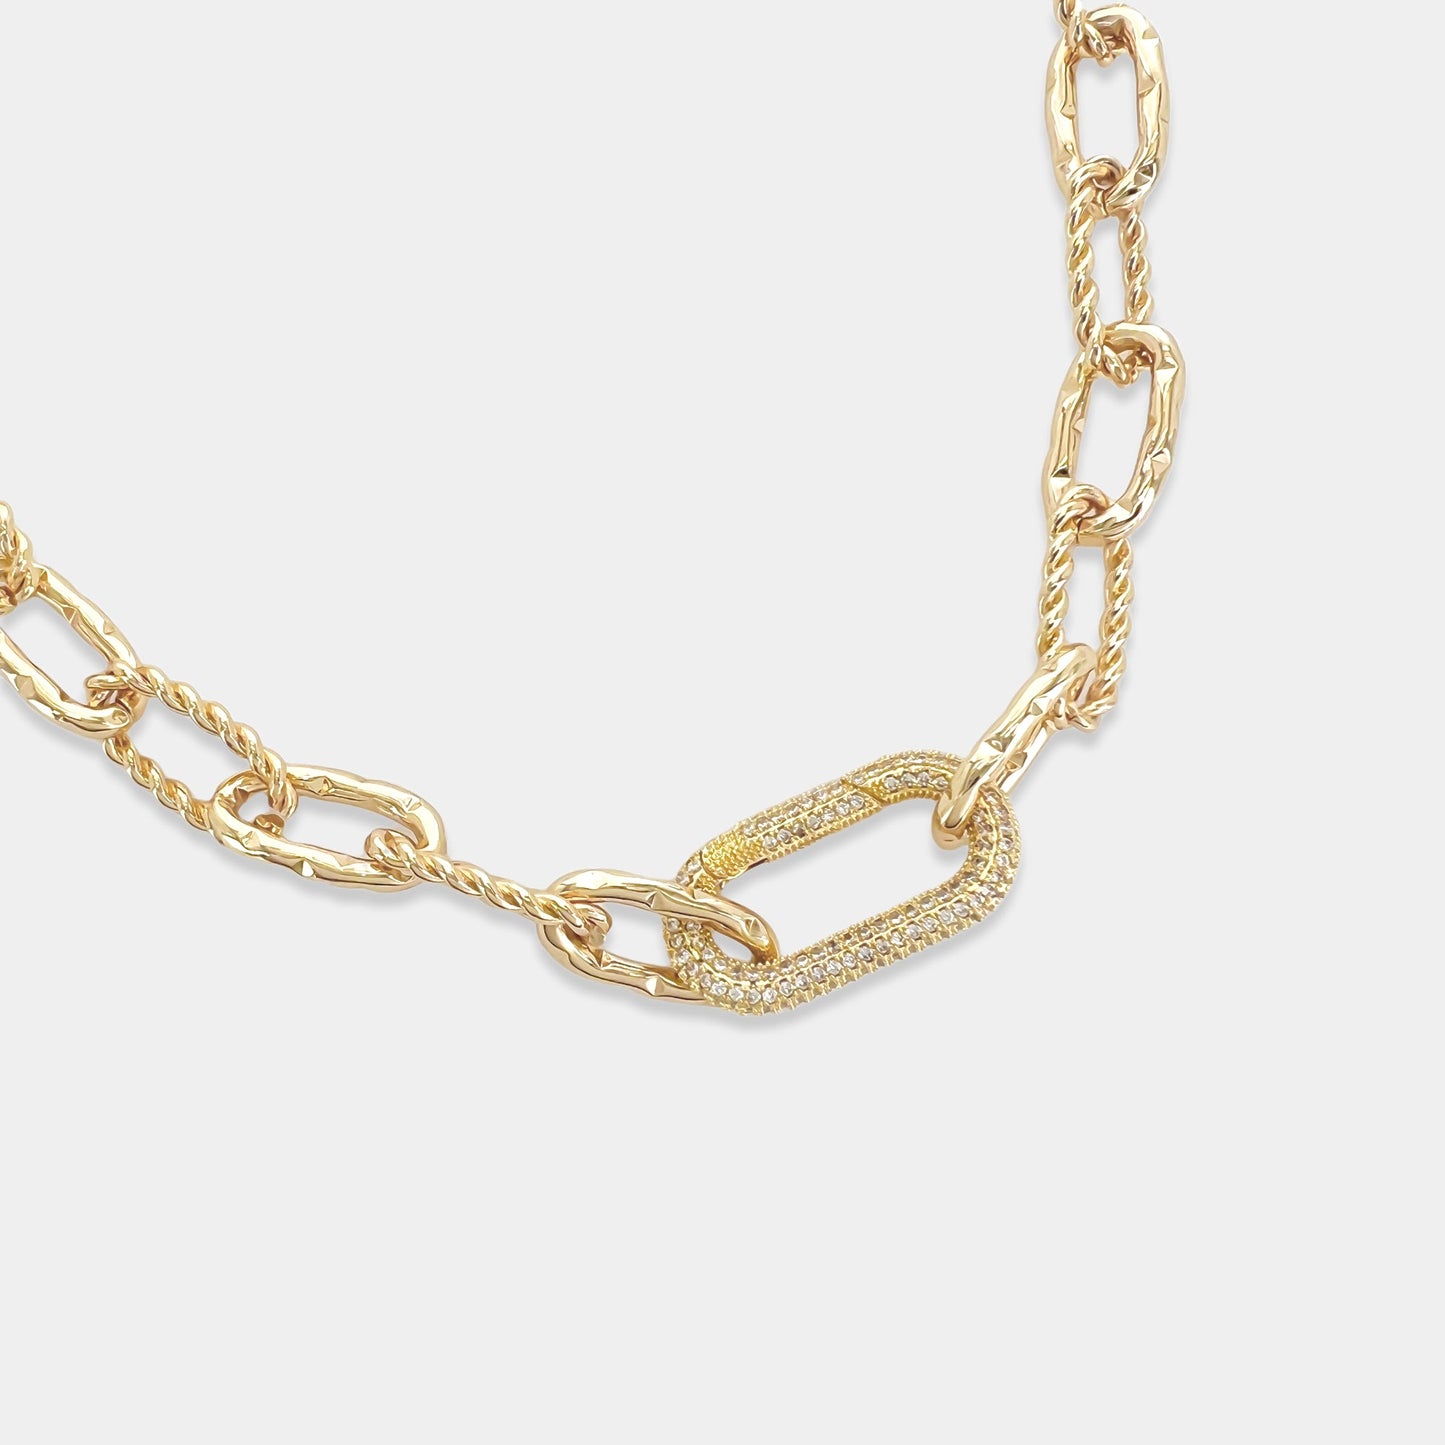 ANK352 Hammered Rope Chain NK